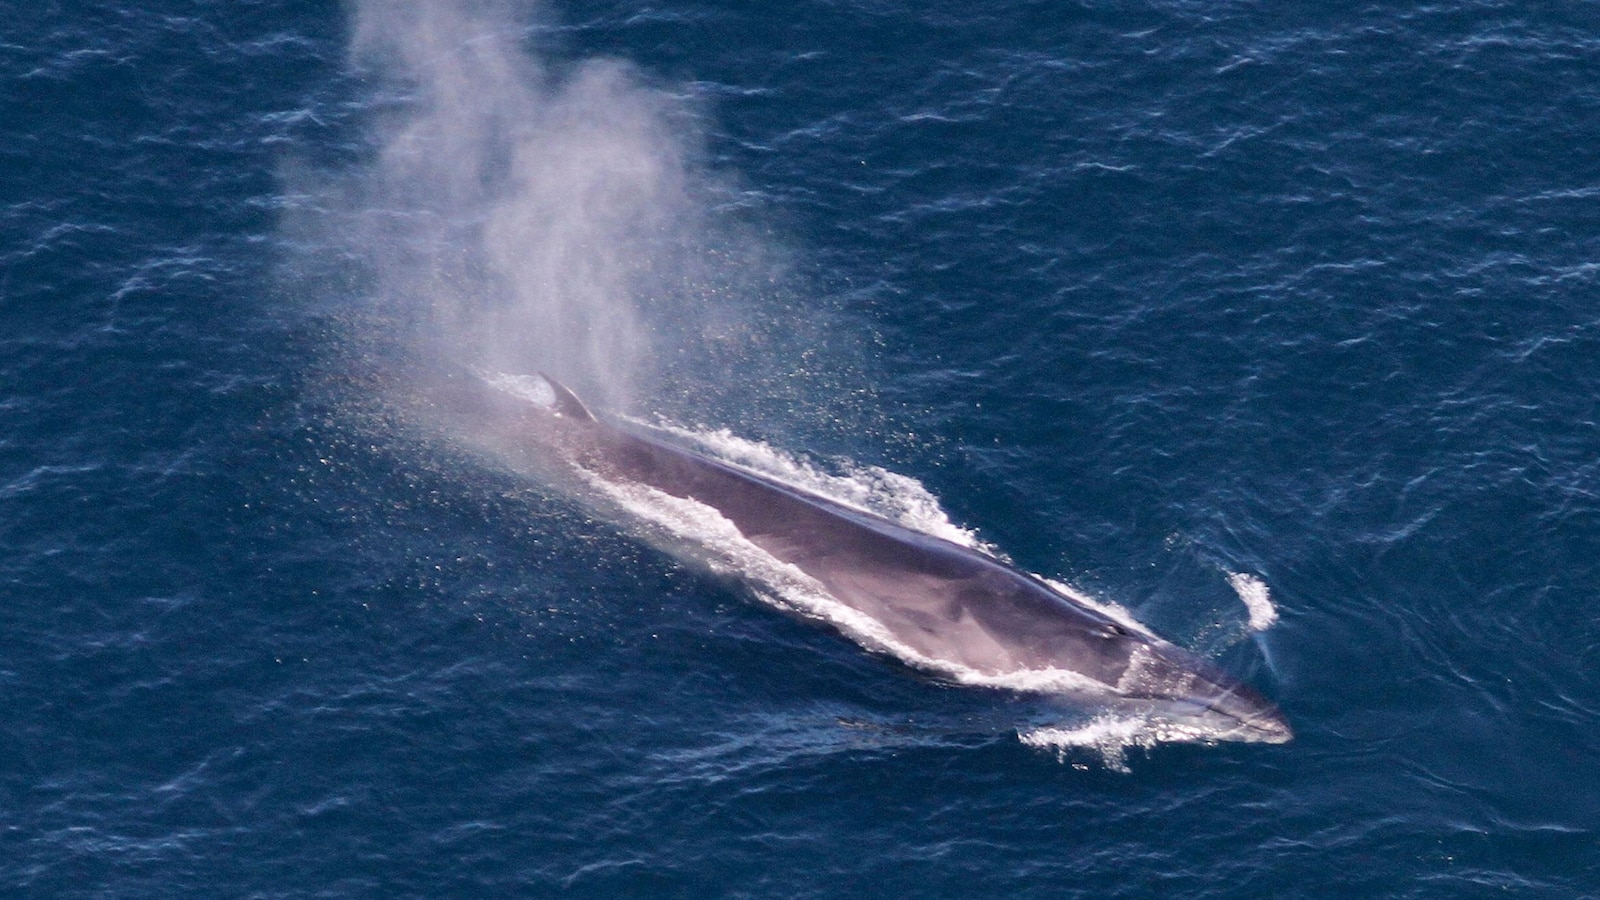 Numerous Whale Sightings, Including Endangered Sei Whales, Reported off the Coast of New England